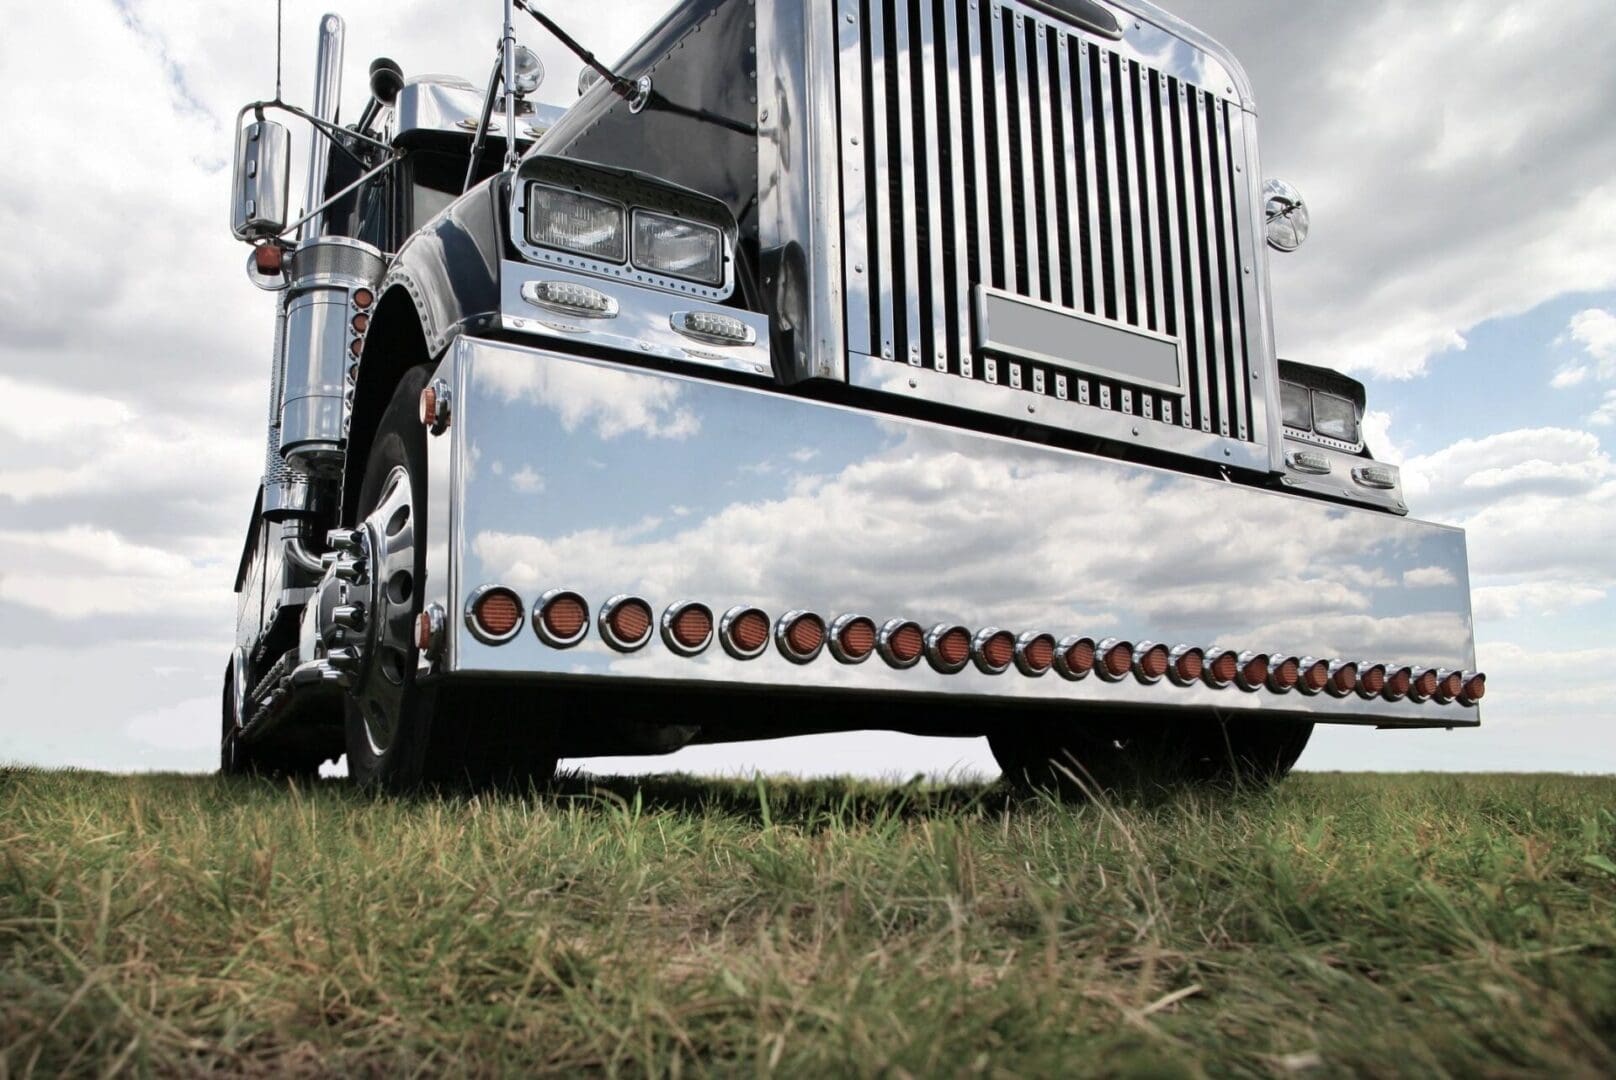 A close up of the front end of a semi truck